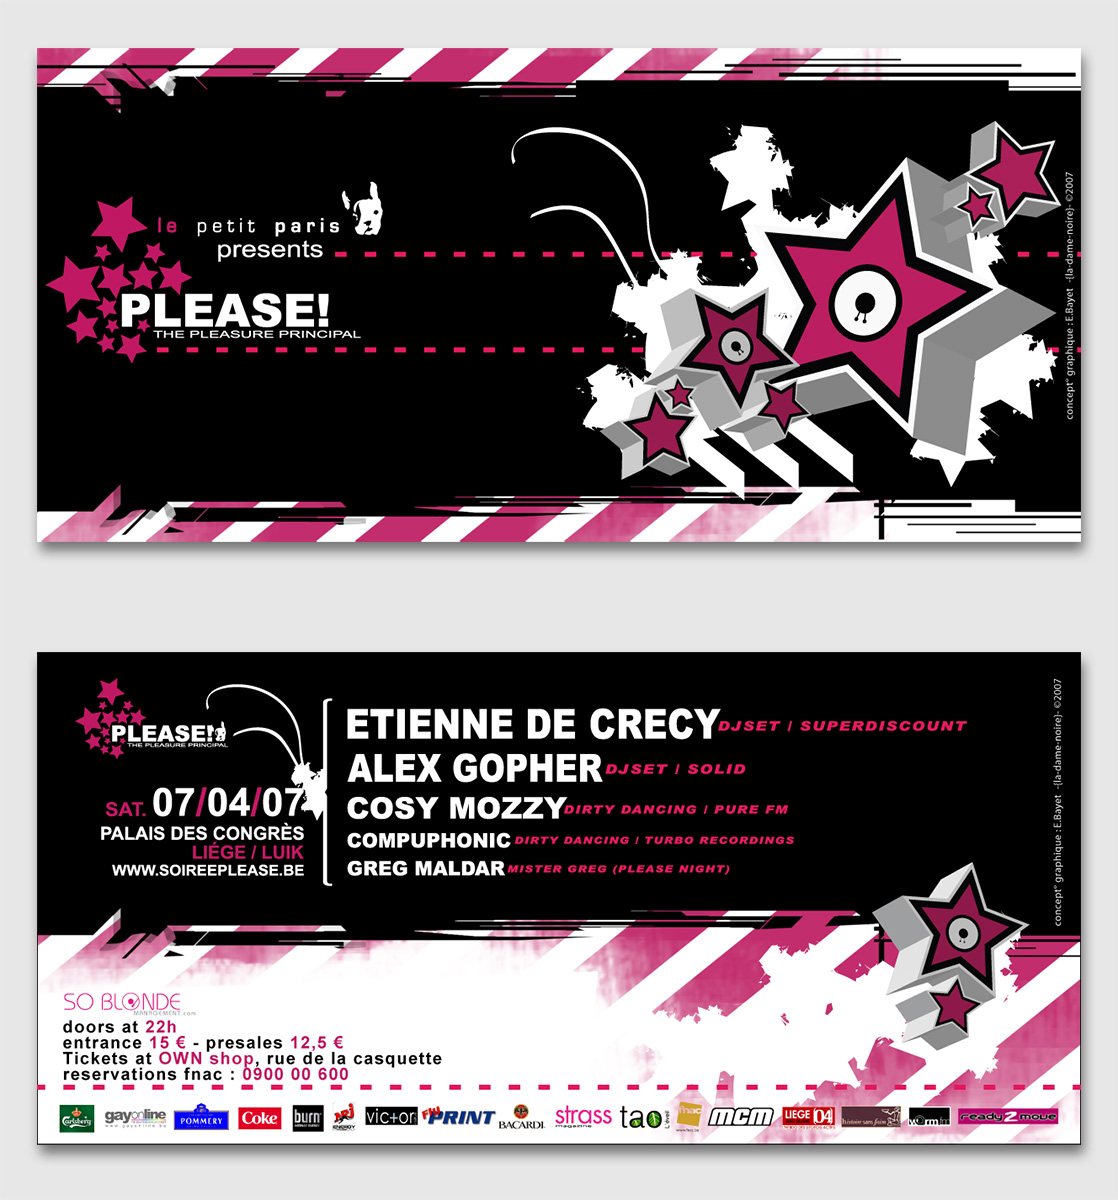 Ticket for an event with Etienne de Crecy and Alex Gopher